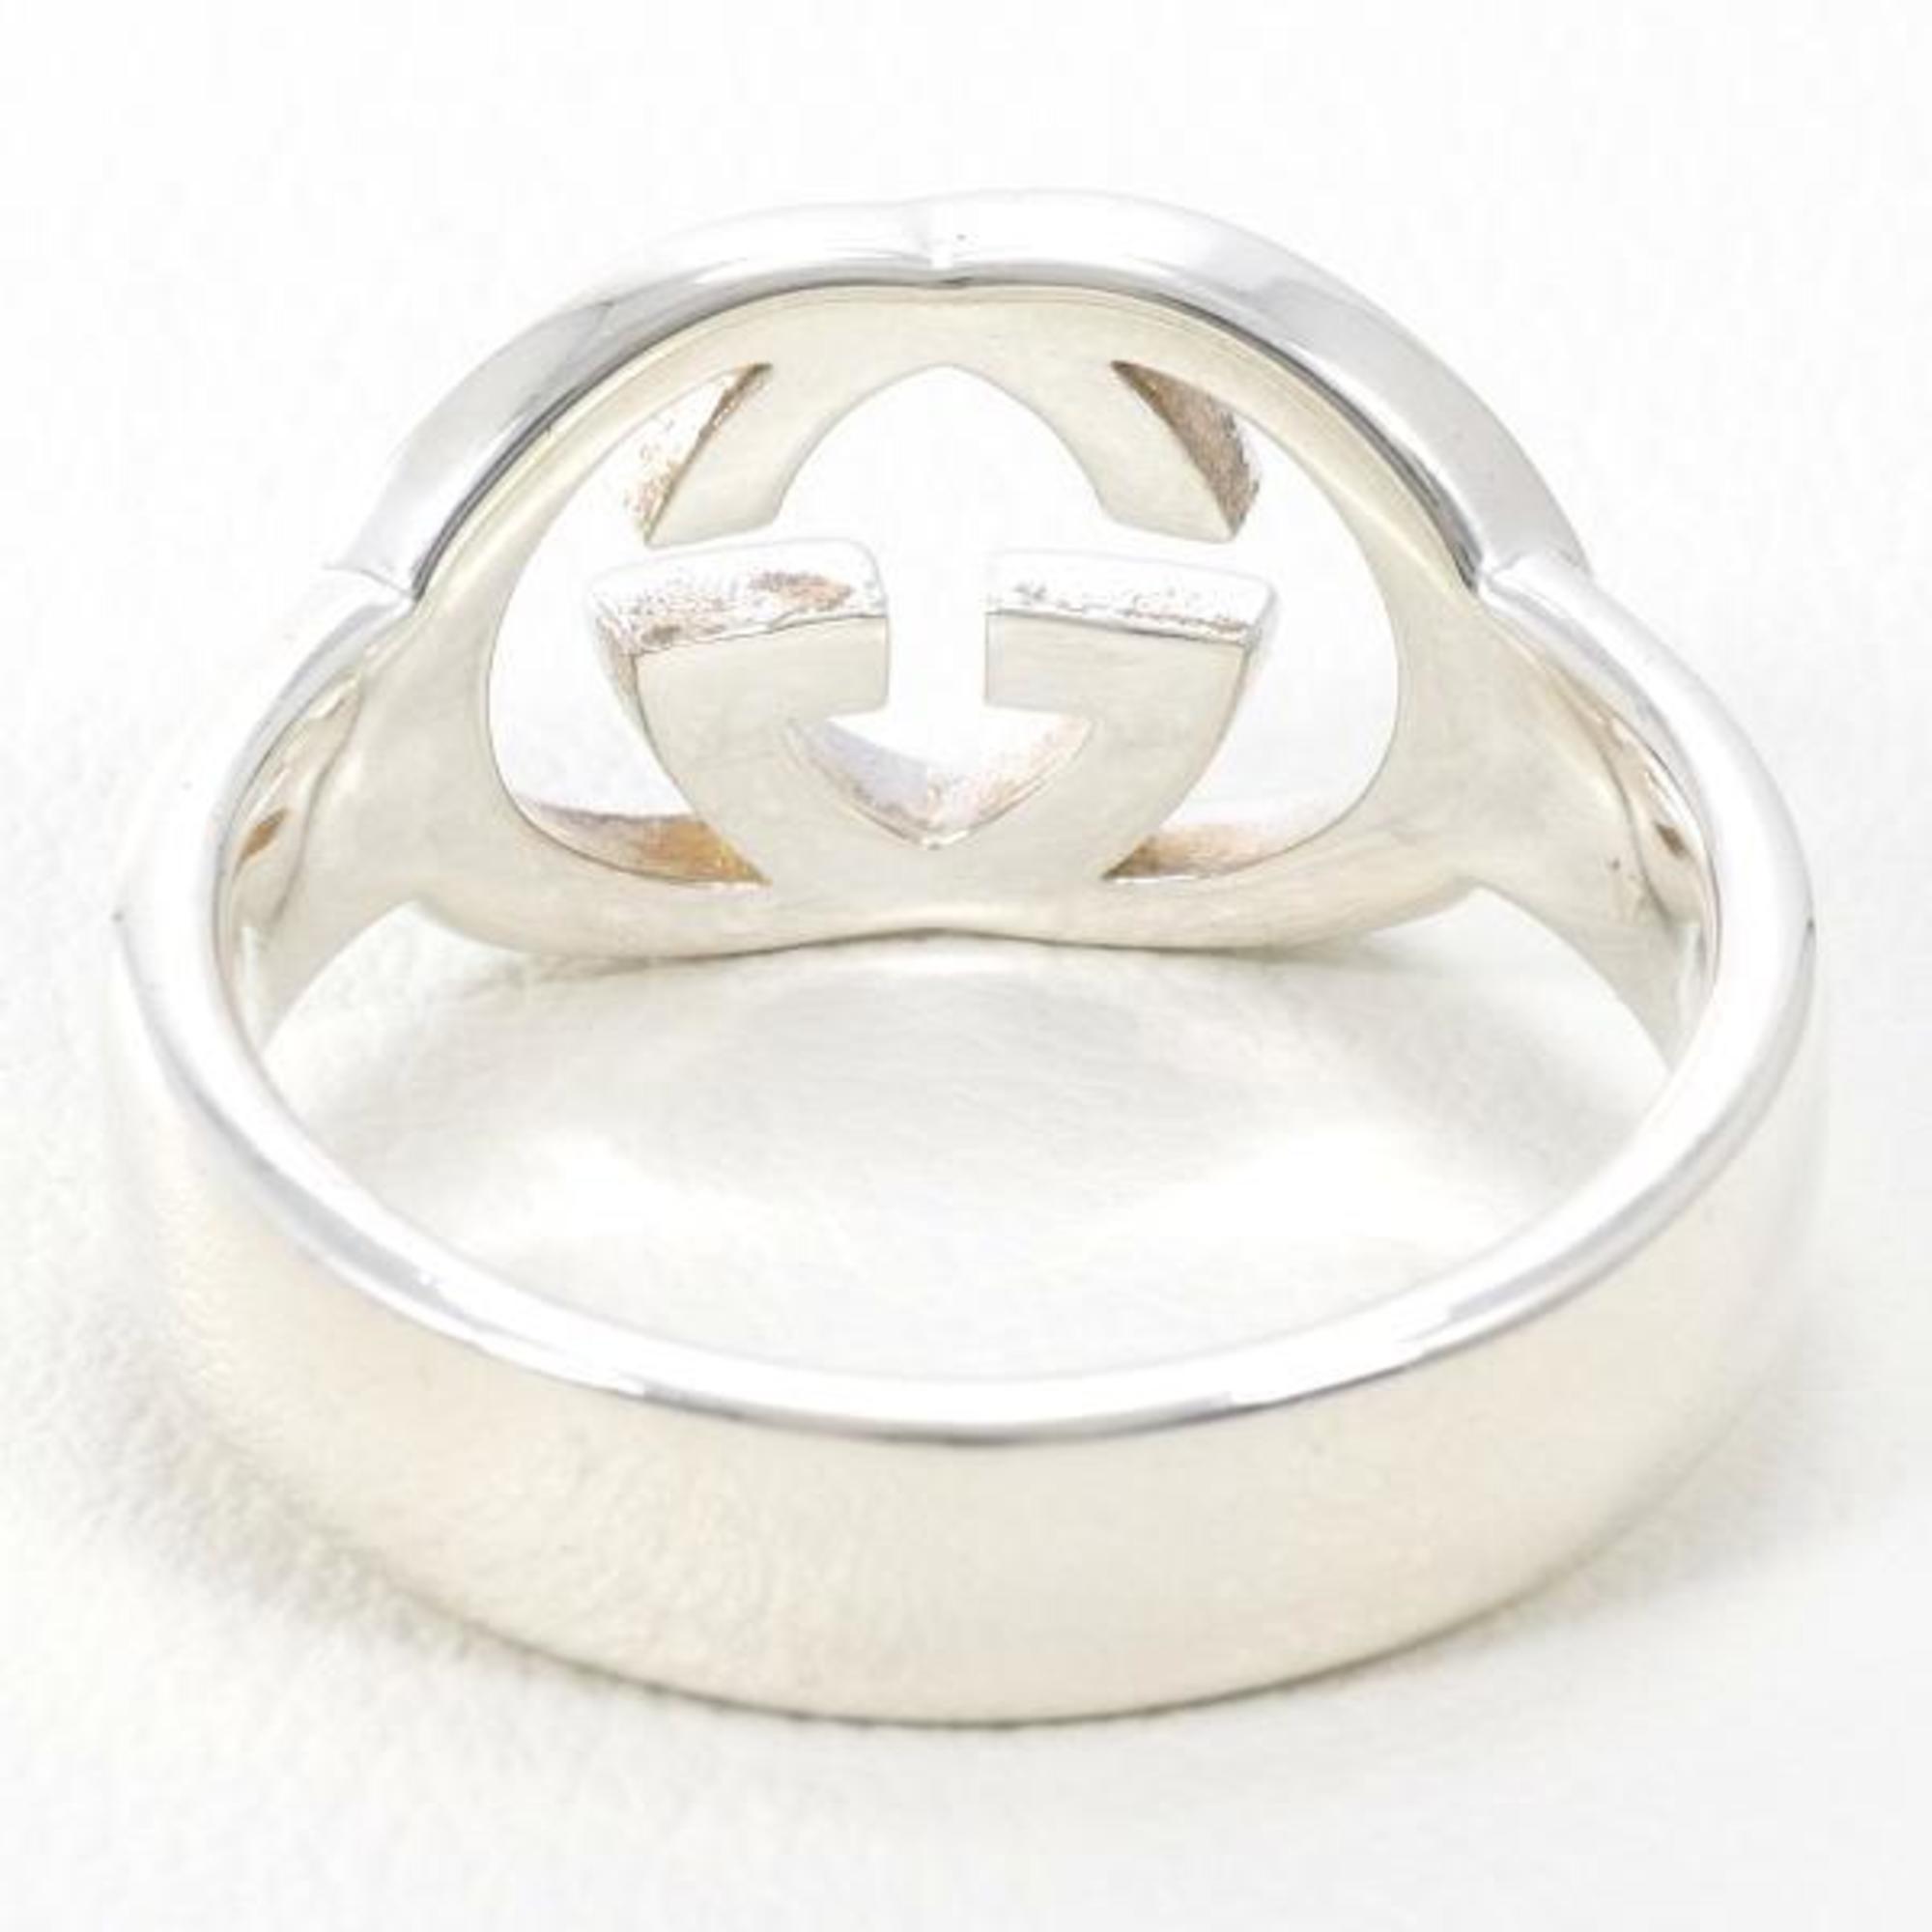 Gucci Interlocking G Silver Ring Size 16 Total Weight Approx. 5.7g Jewelry Wrapping Free